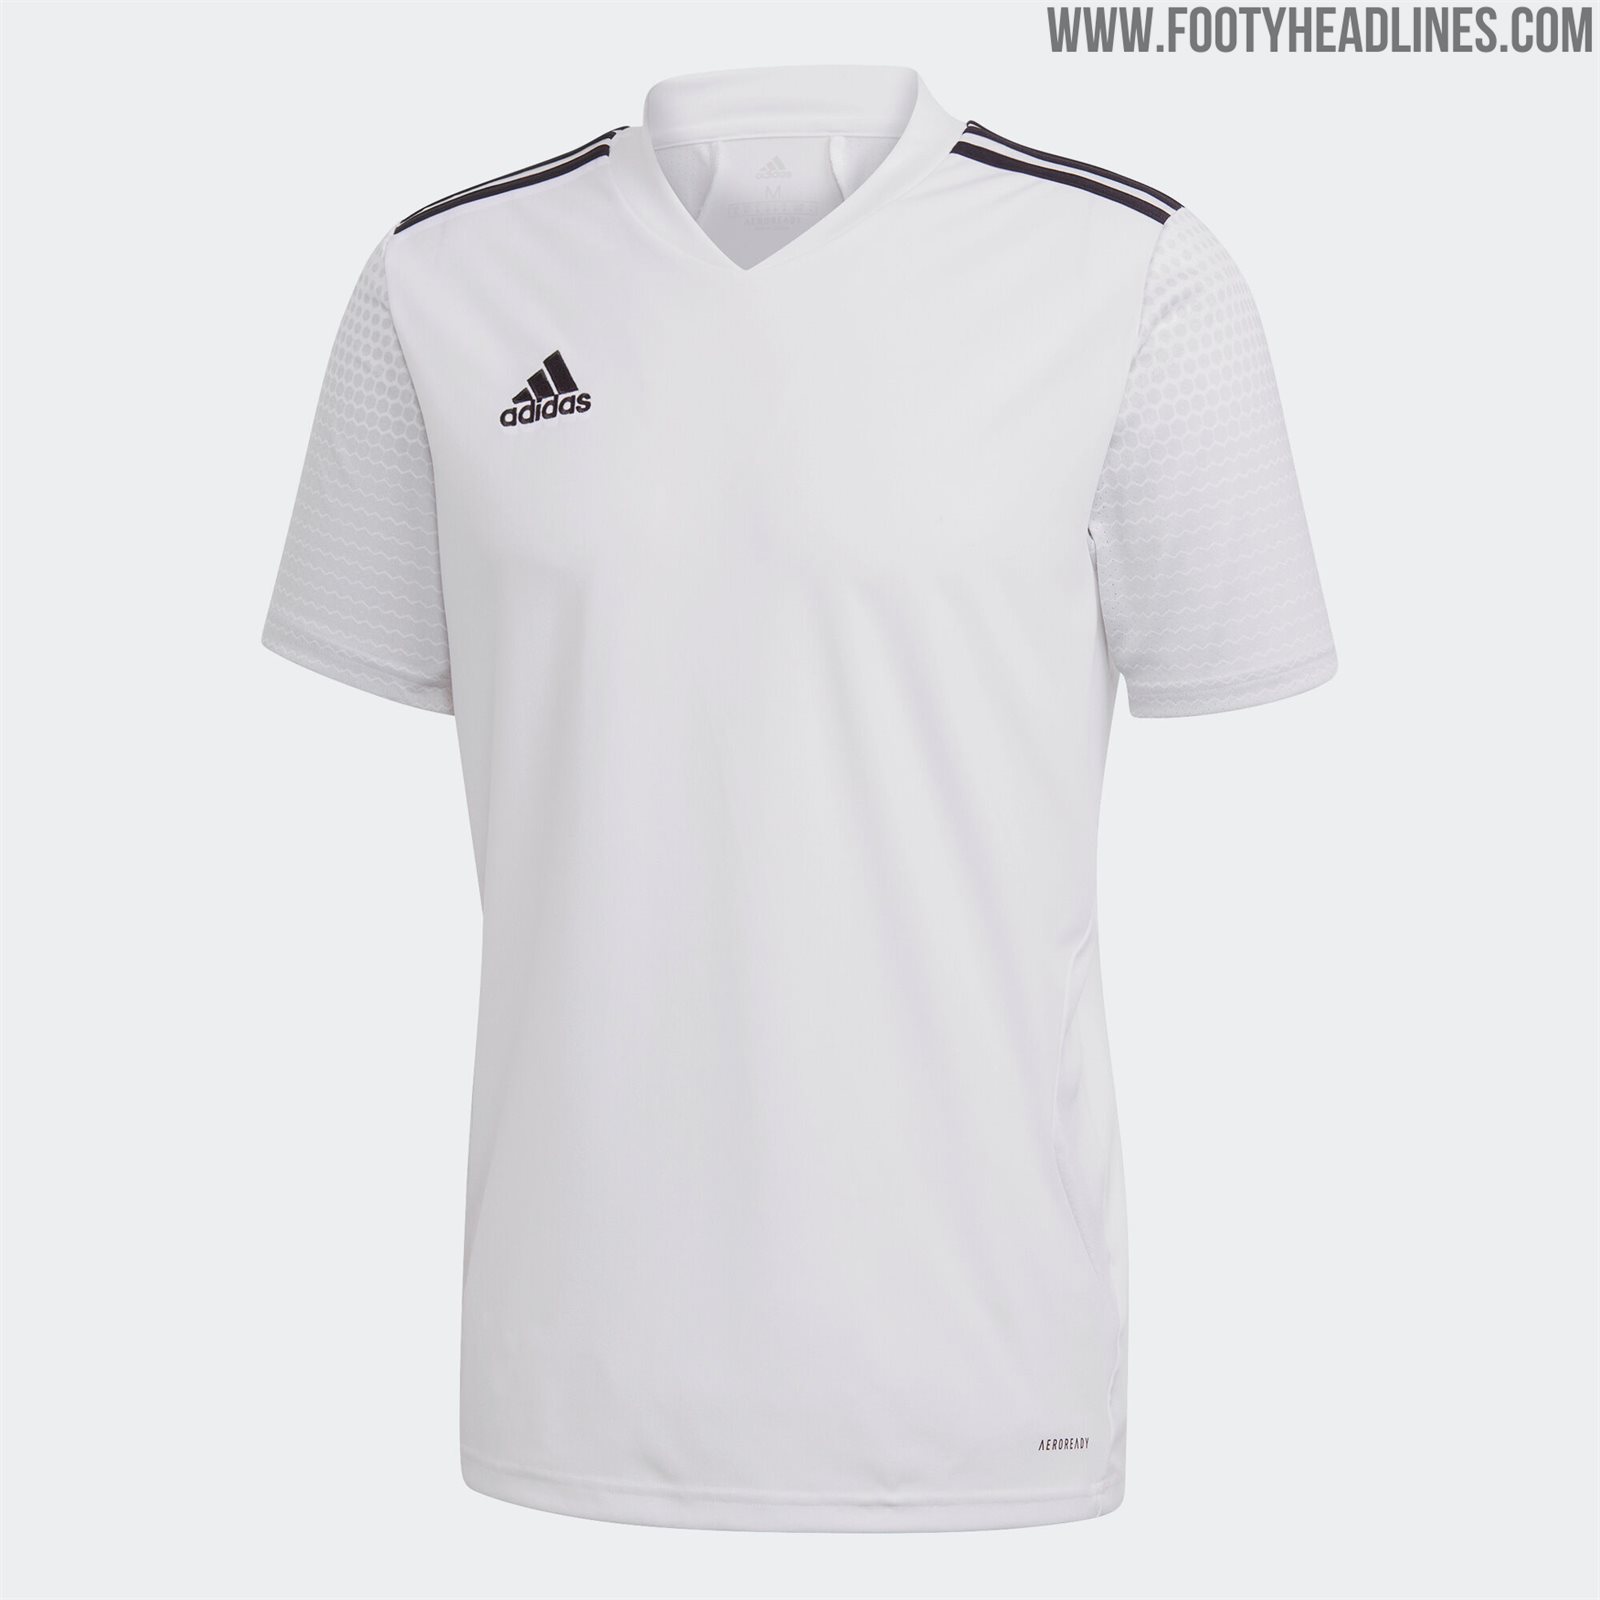 Adidas Regista 20 Template Released - To Be Used in 2020-21 Season ...